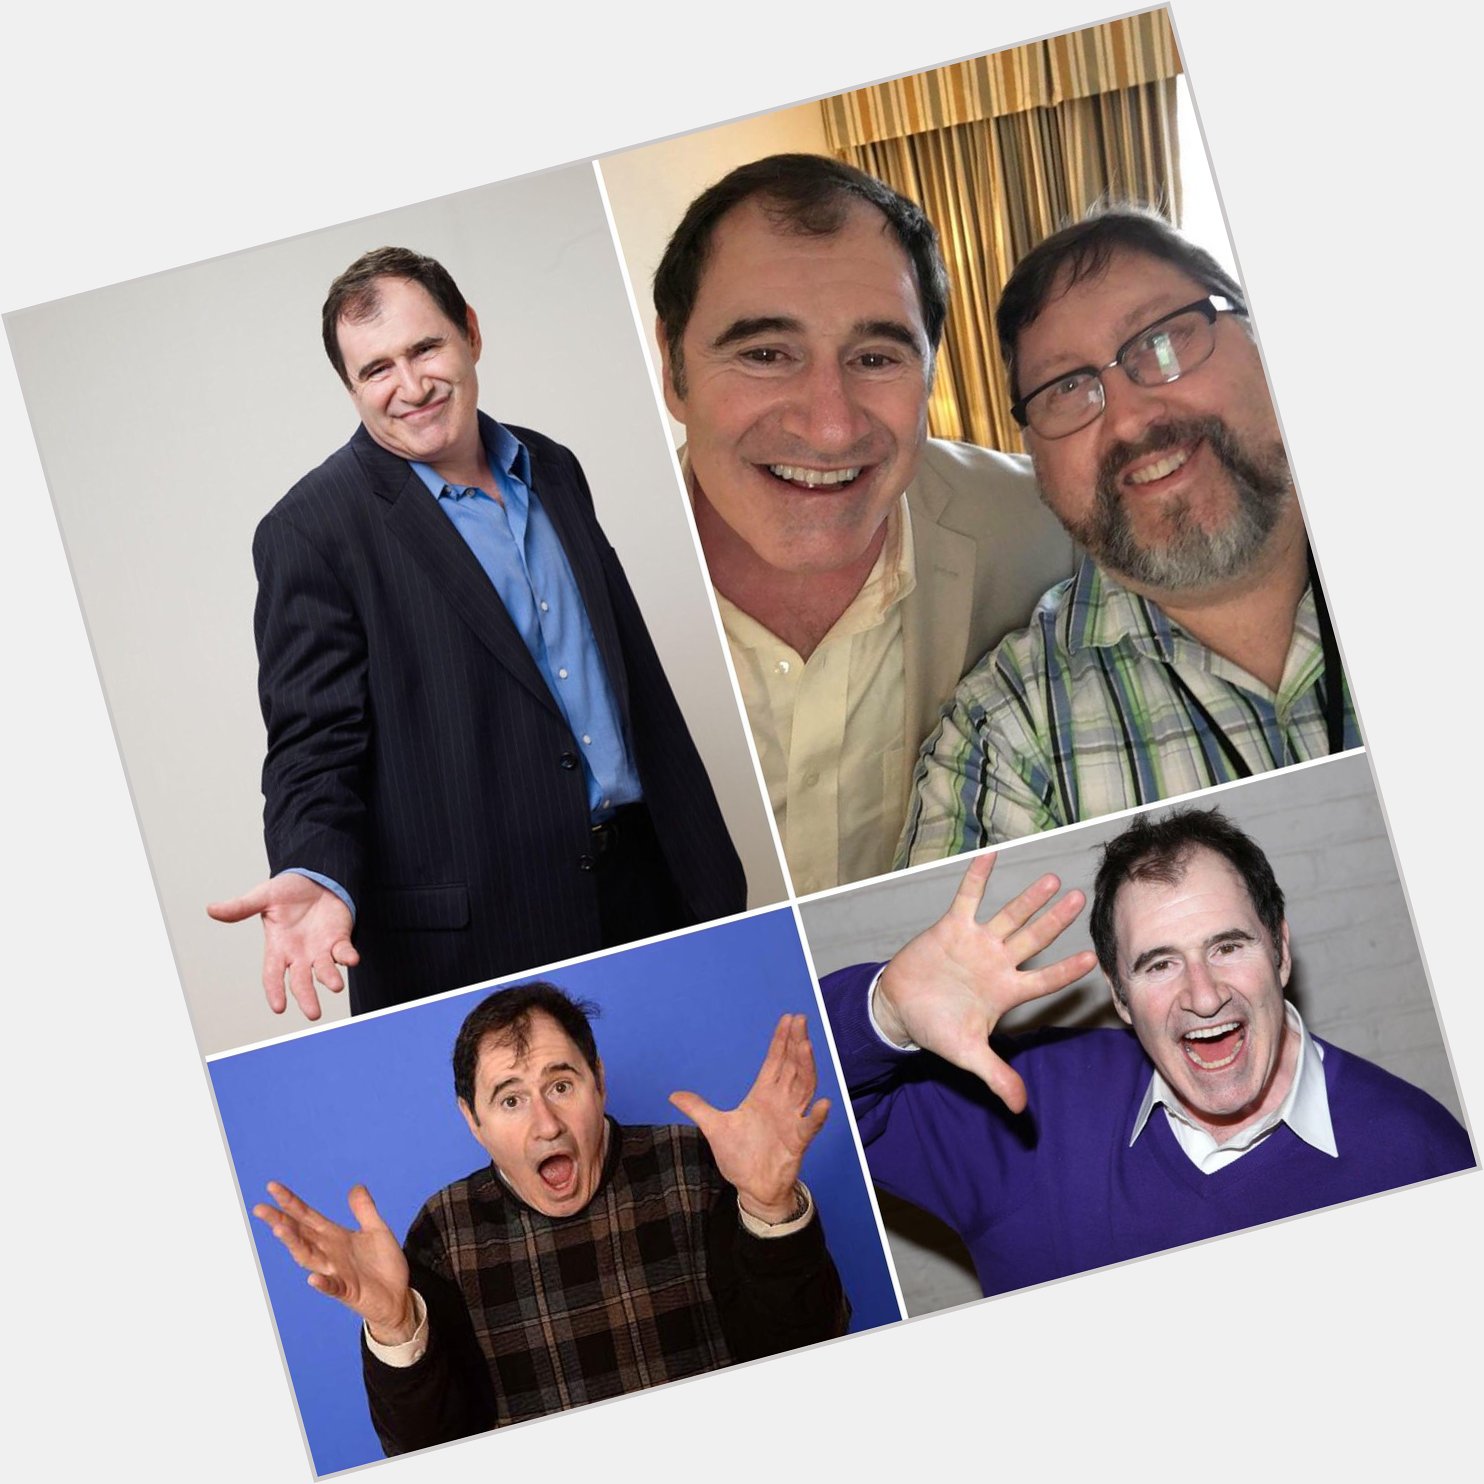 Happy birthday to one of my favorite Random Roles interviewees: Richard Kind.  